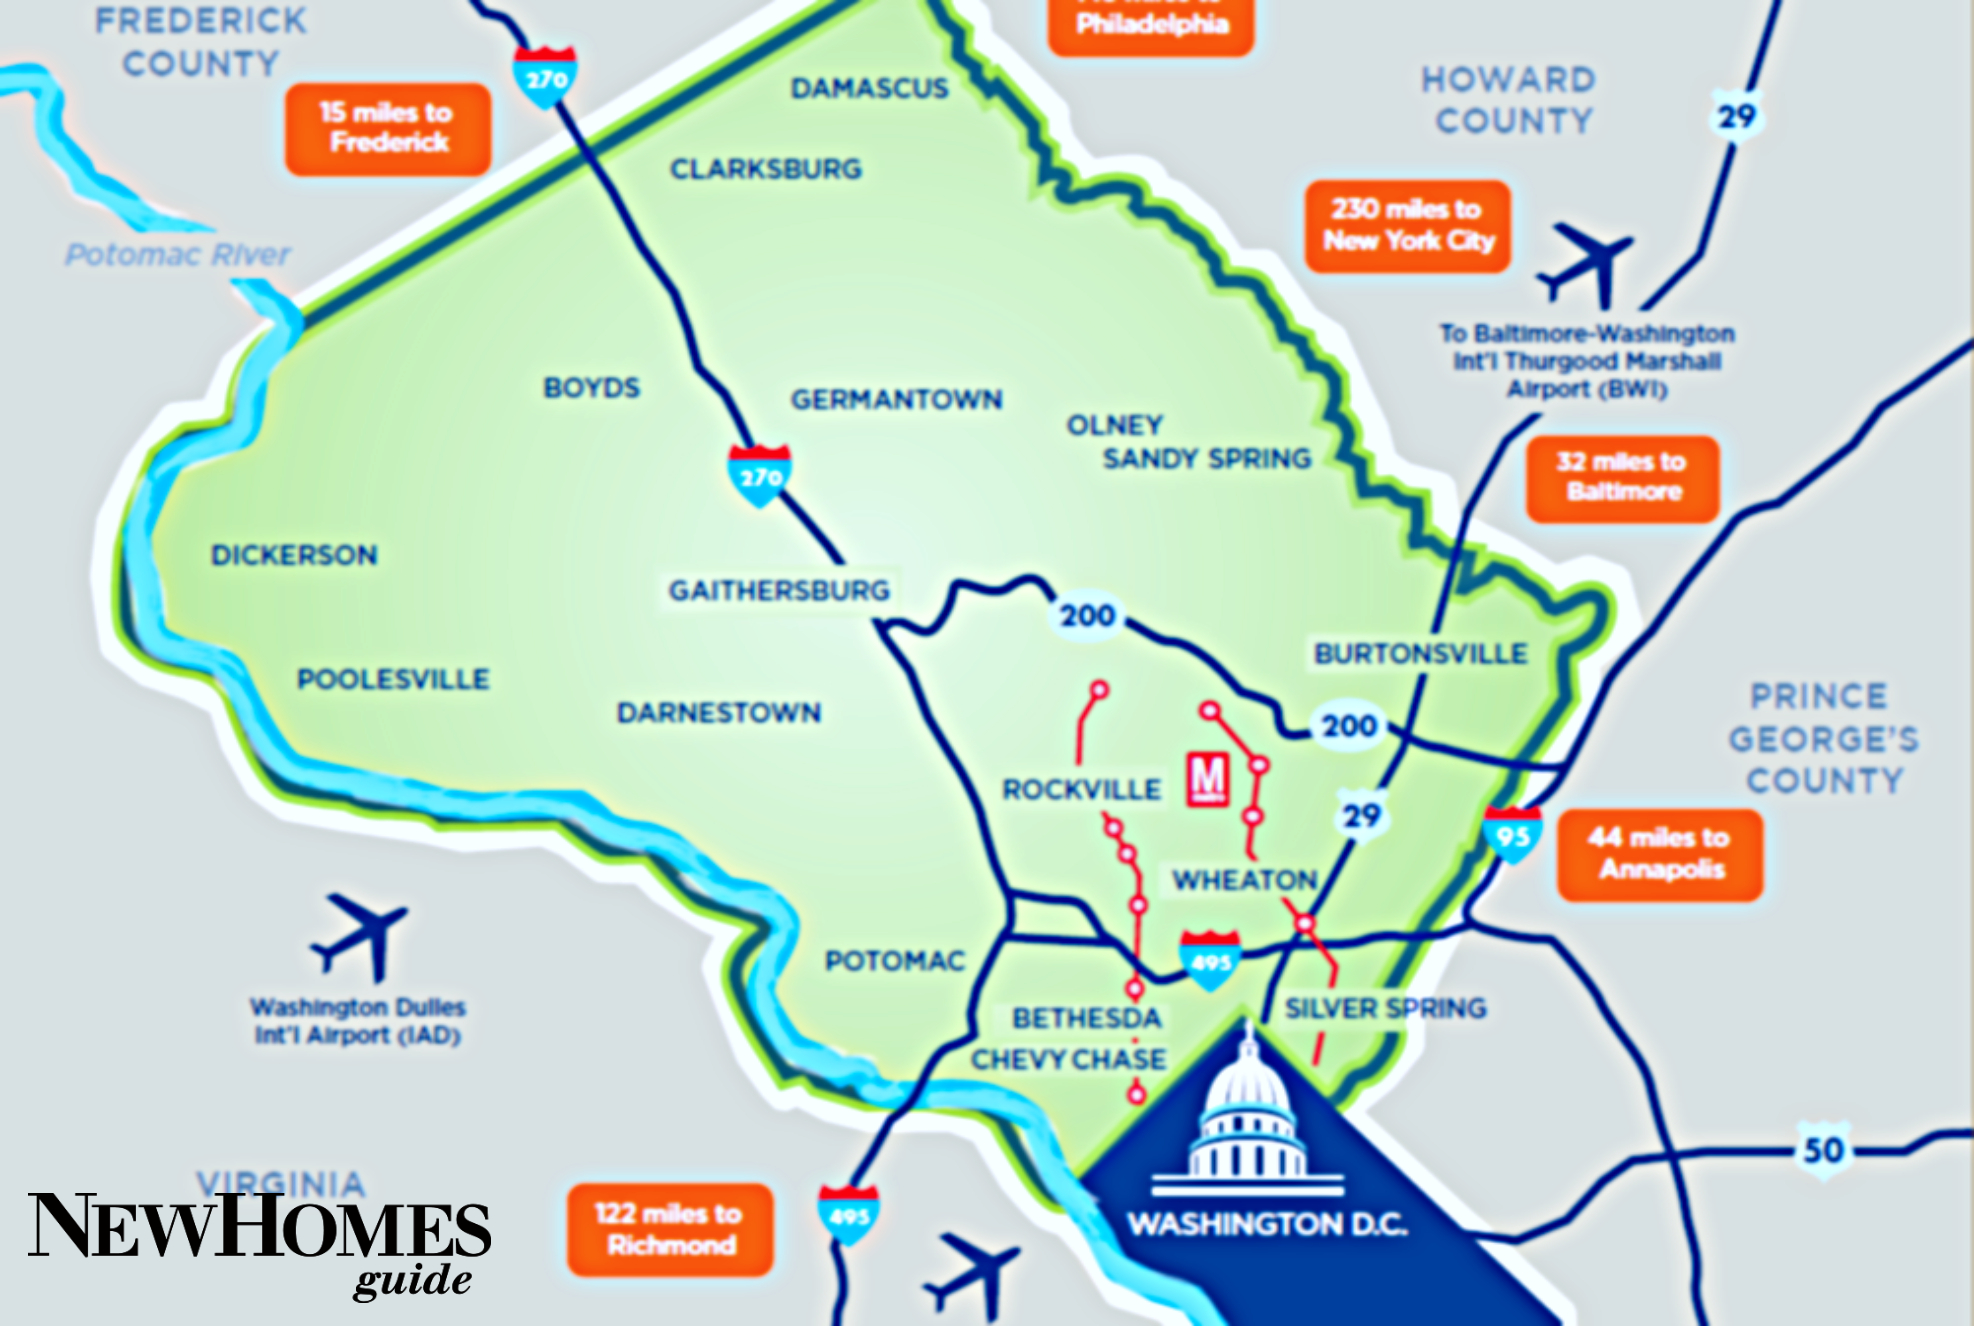 colleges in montgomery county map